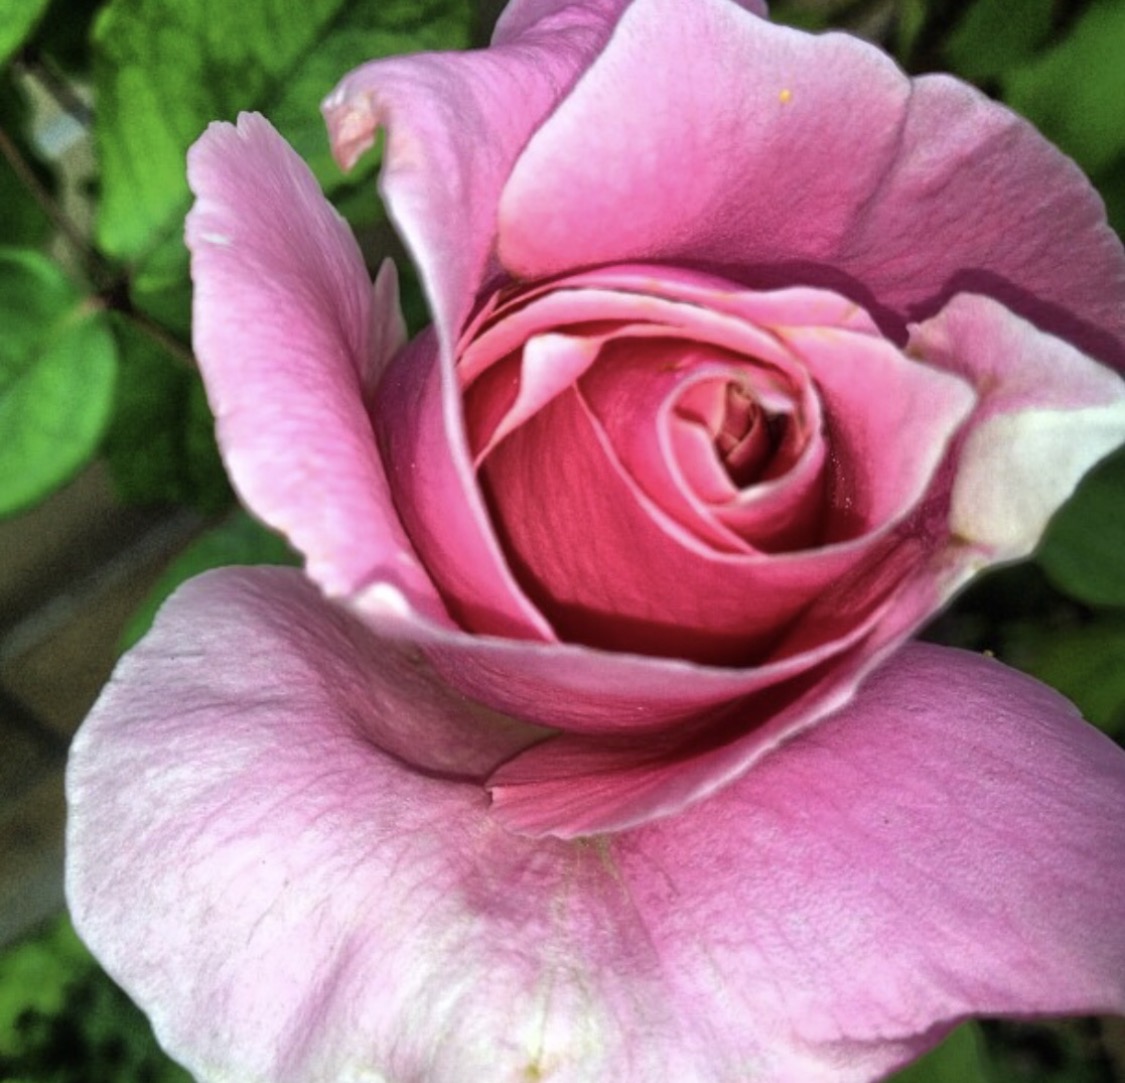 Photo by Beau LeBaron May25th 2012, Rose in my Back Yard Brea CA